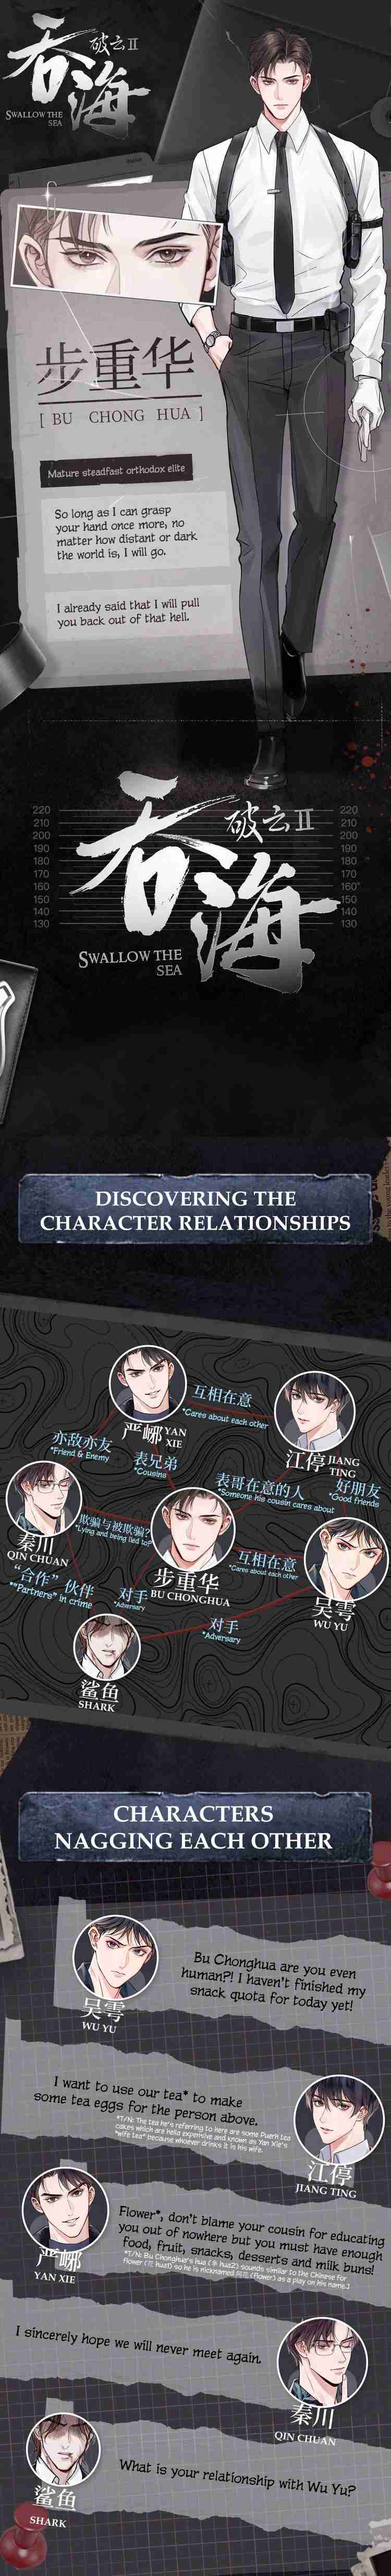 Breaking Through the Clouds 2: Swallow the Sea Ch. 0.3 Bu Chonghua’s Information Reveal!